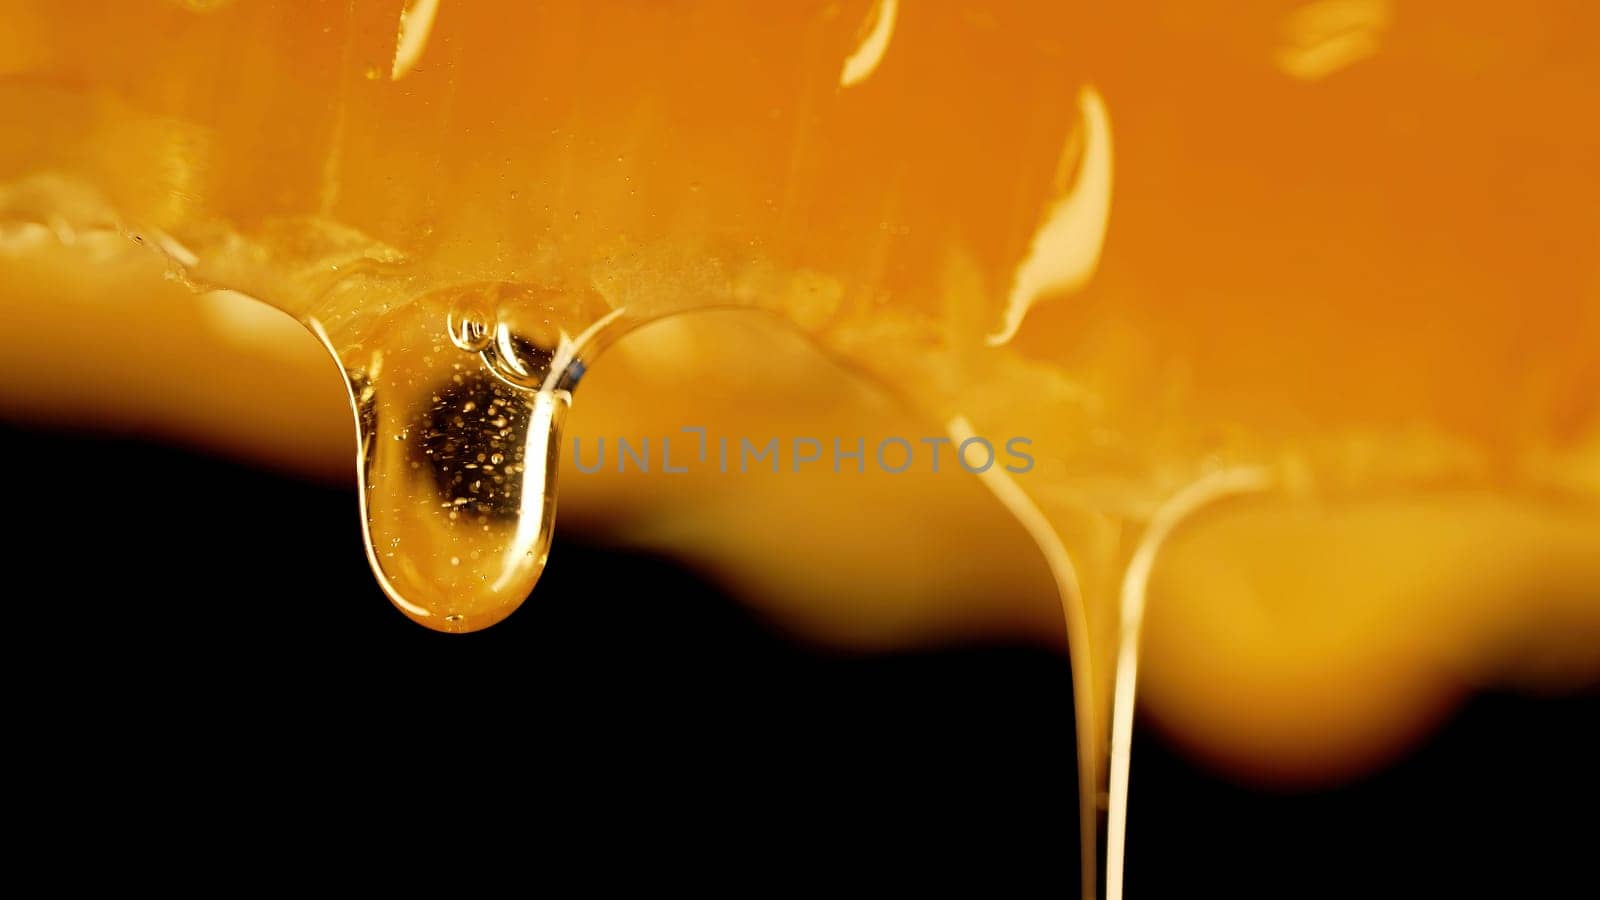 Honey dripping from honeycombs extreme macro.Natural bees wax cells, gold elixir by kristina_kokhanova